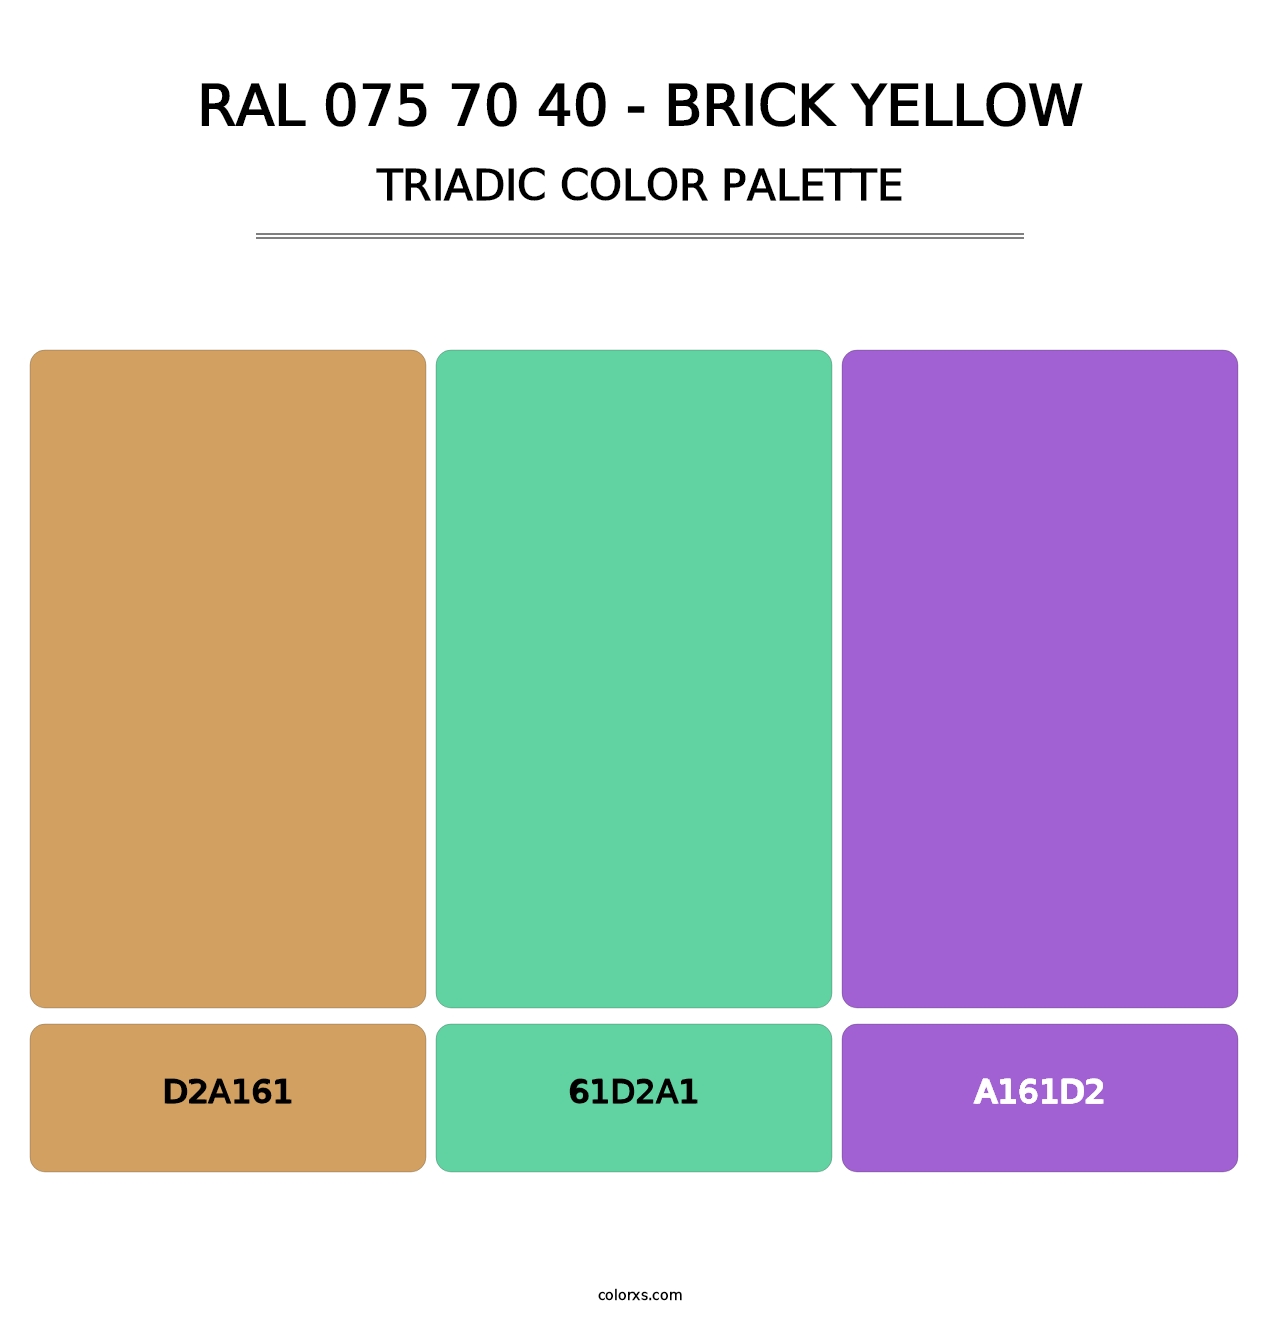 RAL 075 70 40 - Brick Yellow - Triadic Color Palette